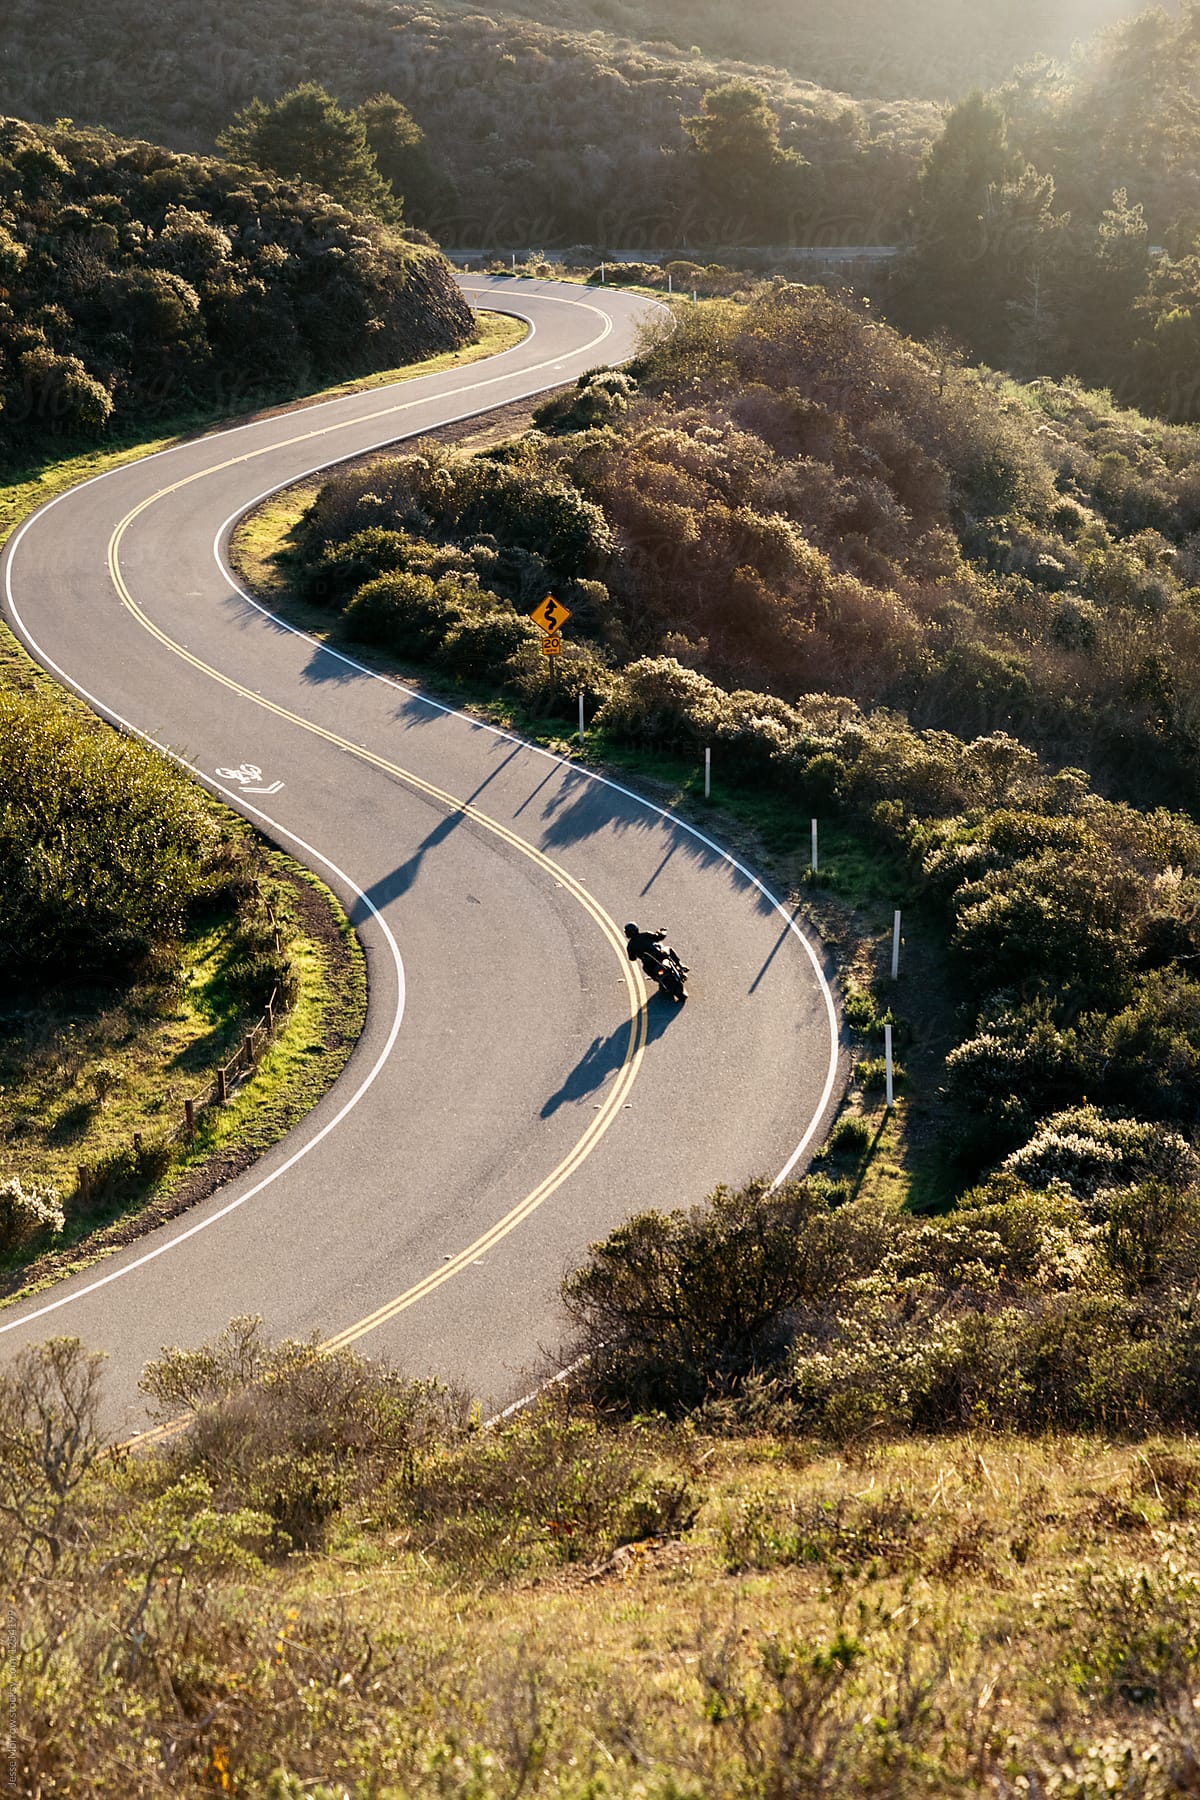 young men ride motorbikes on winding roads in california countryside